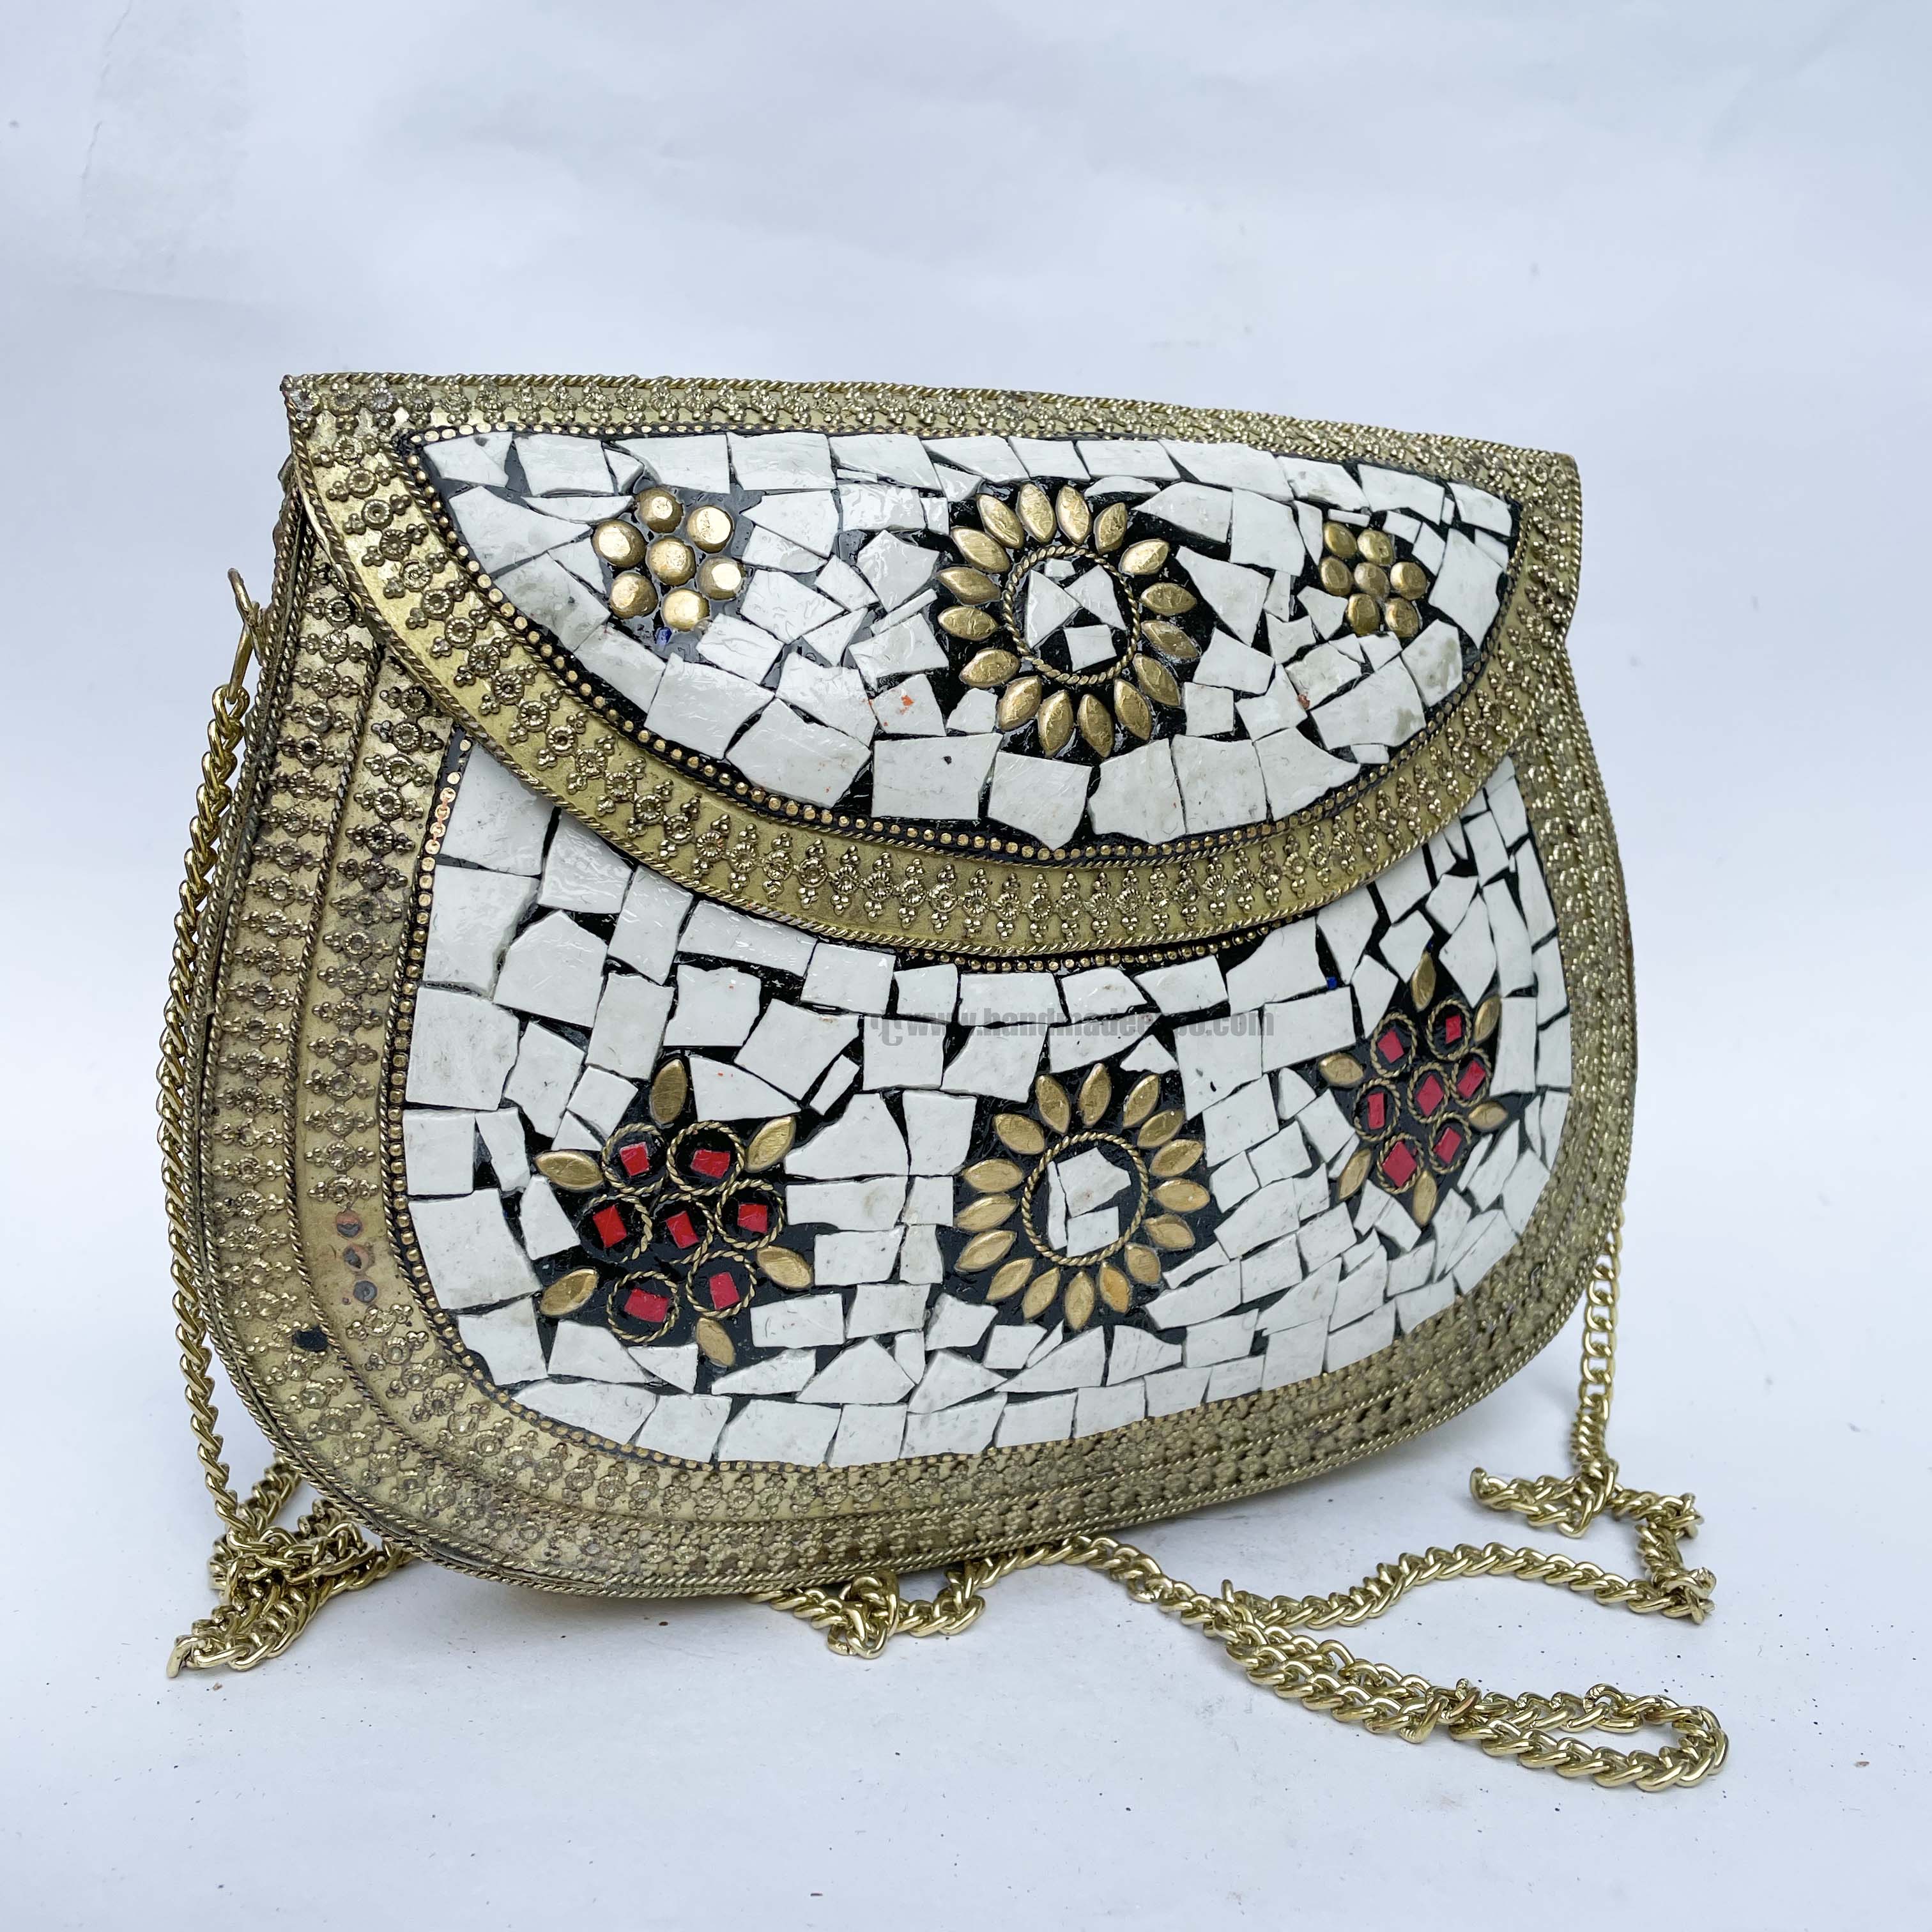 Nepali Handmade Large Size Ladies Bag With stone Setting, metal, golden And White Color